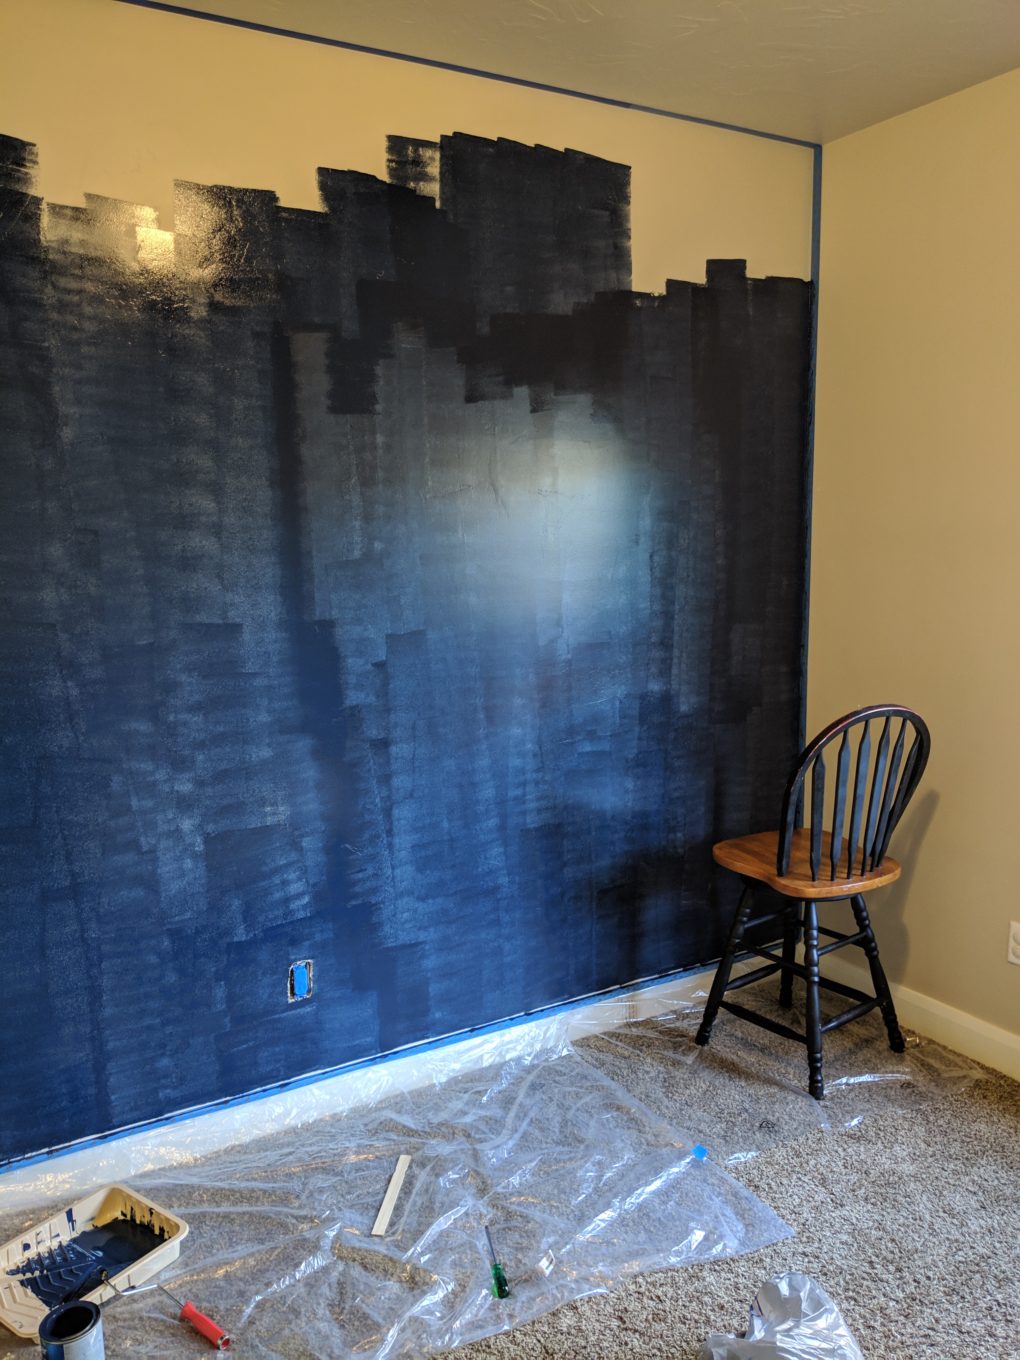 Process for painting our DIY night sky constellation mural wall